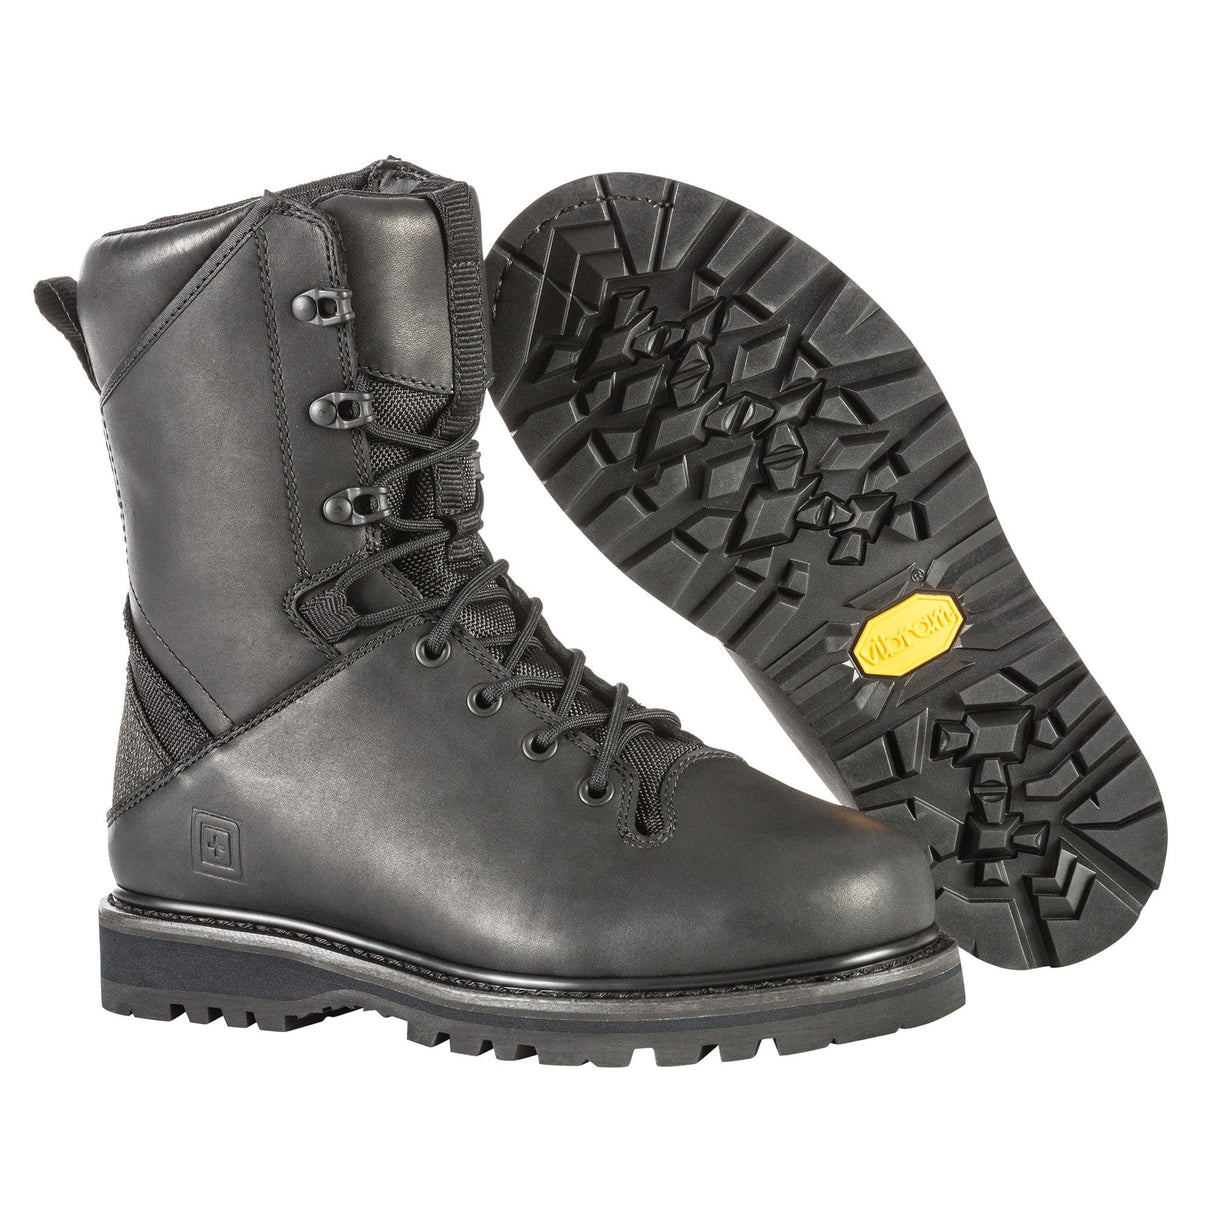 APEX 8" BOOT - 5.11 Tactical Finland